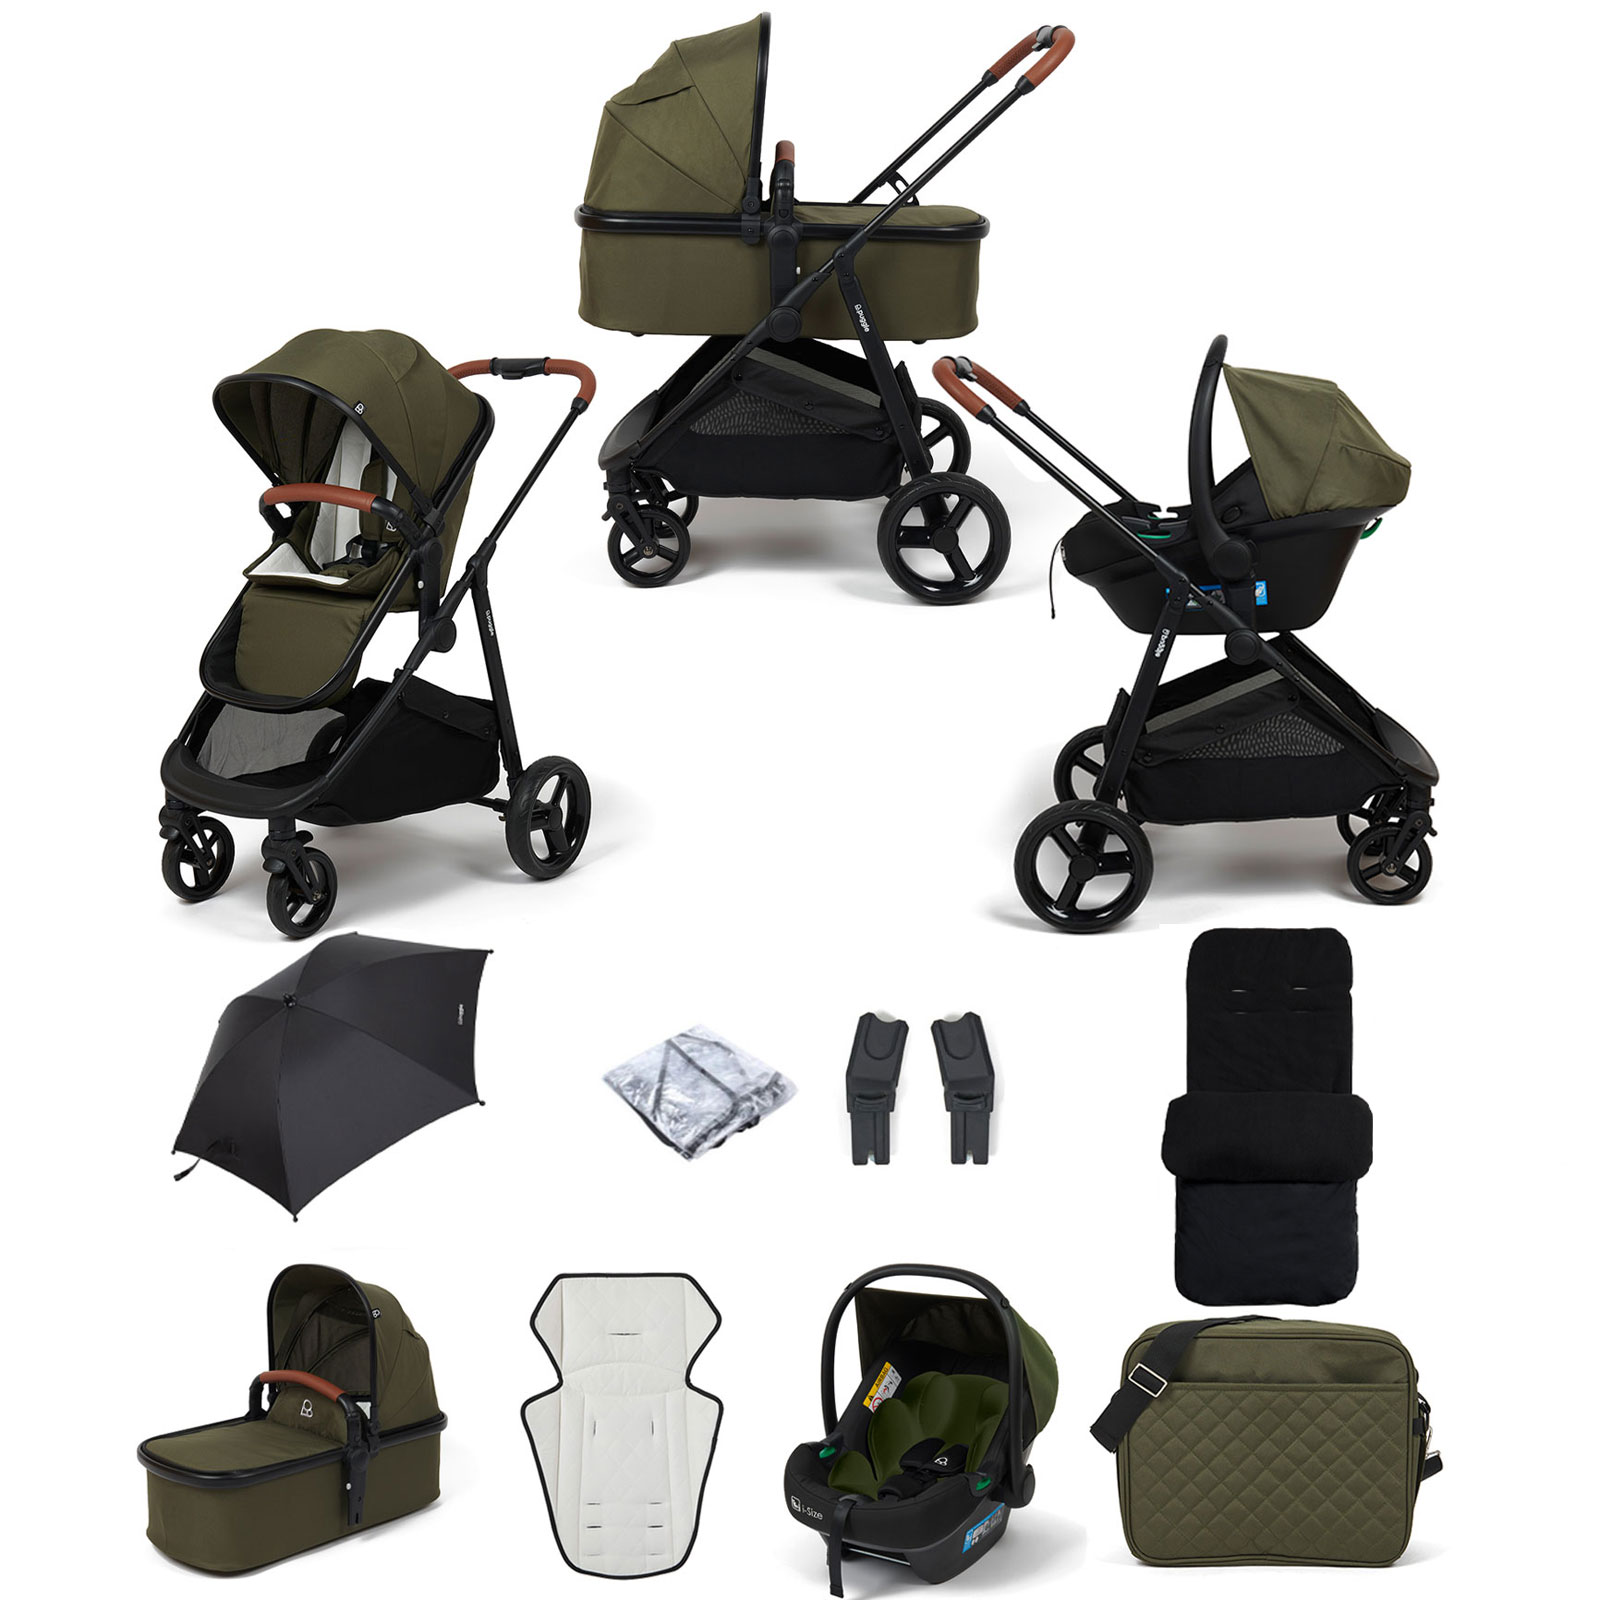 Puggle Monaco XT 3in1 i-Size Travel System with Changing Bag, Parasol & Deluxe Footmuff - Forest Green